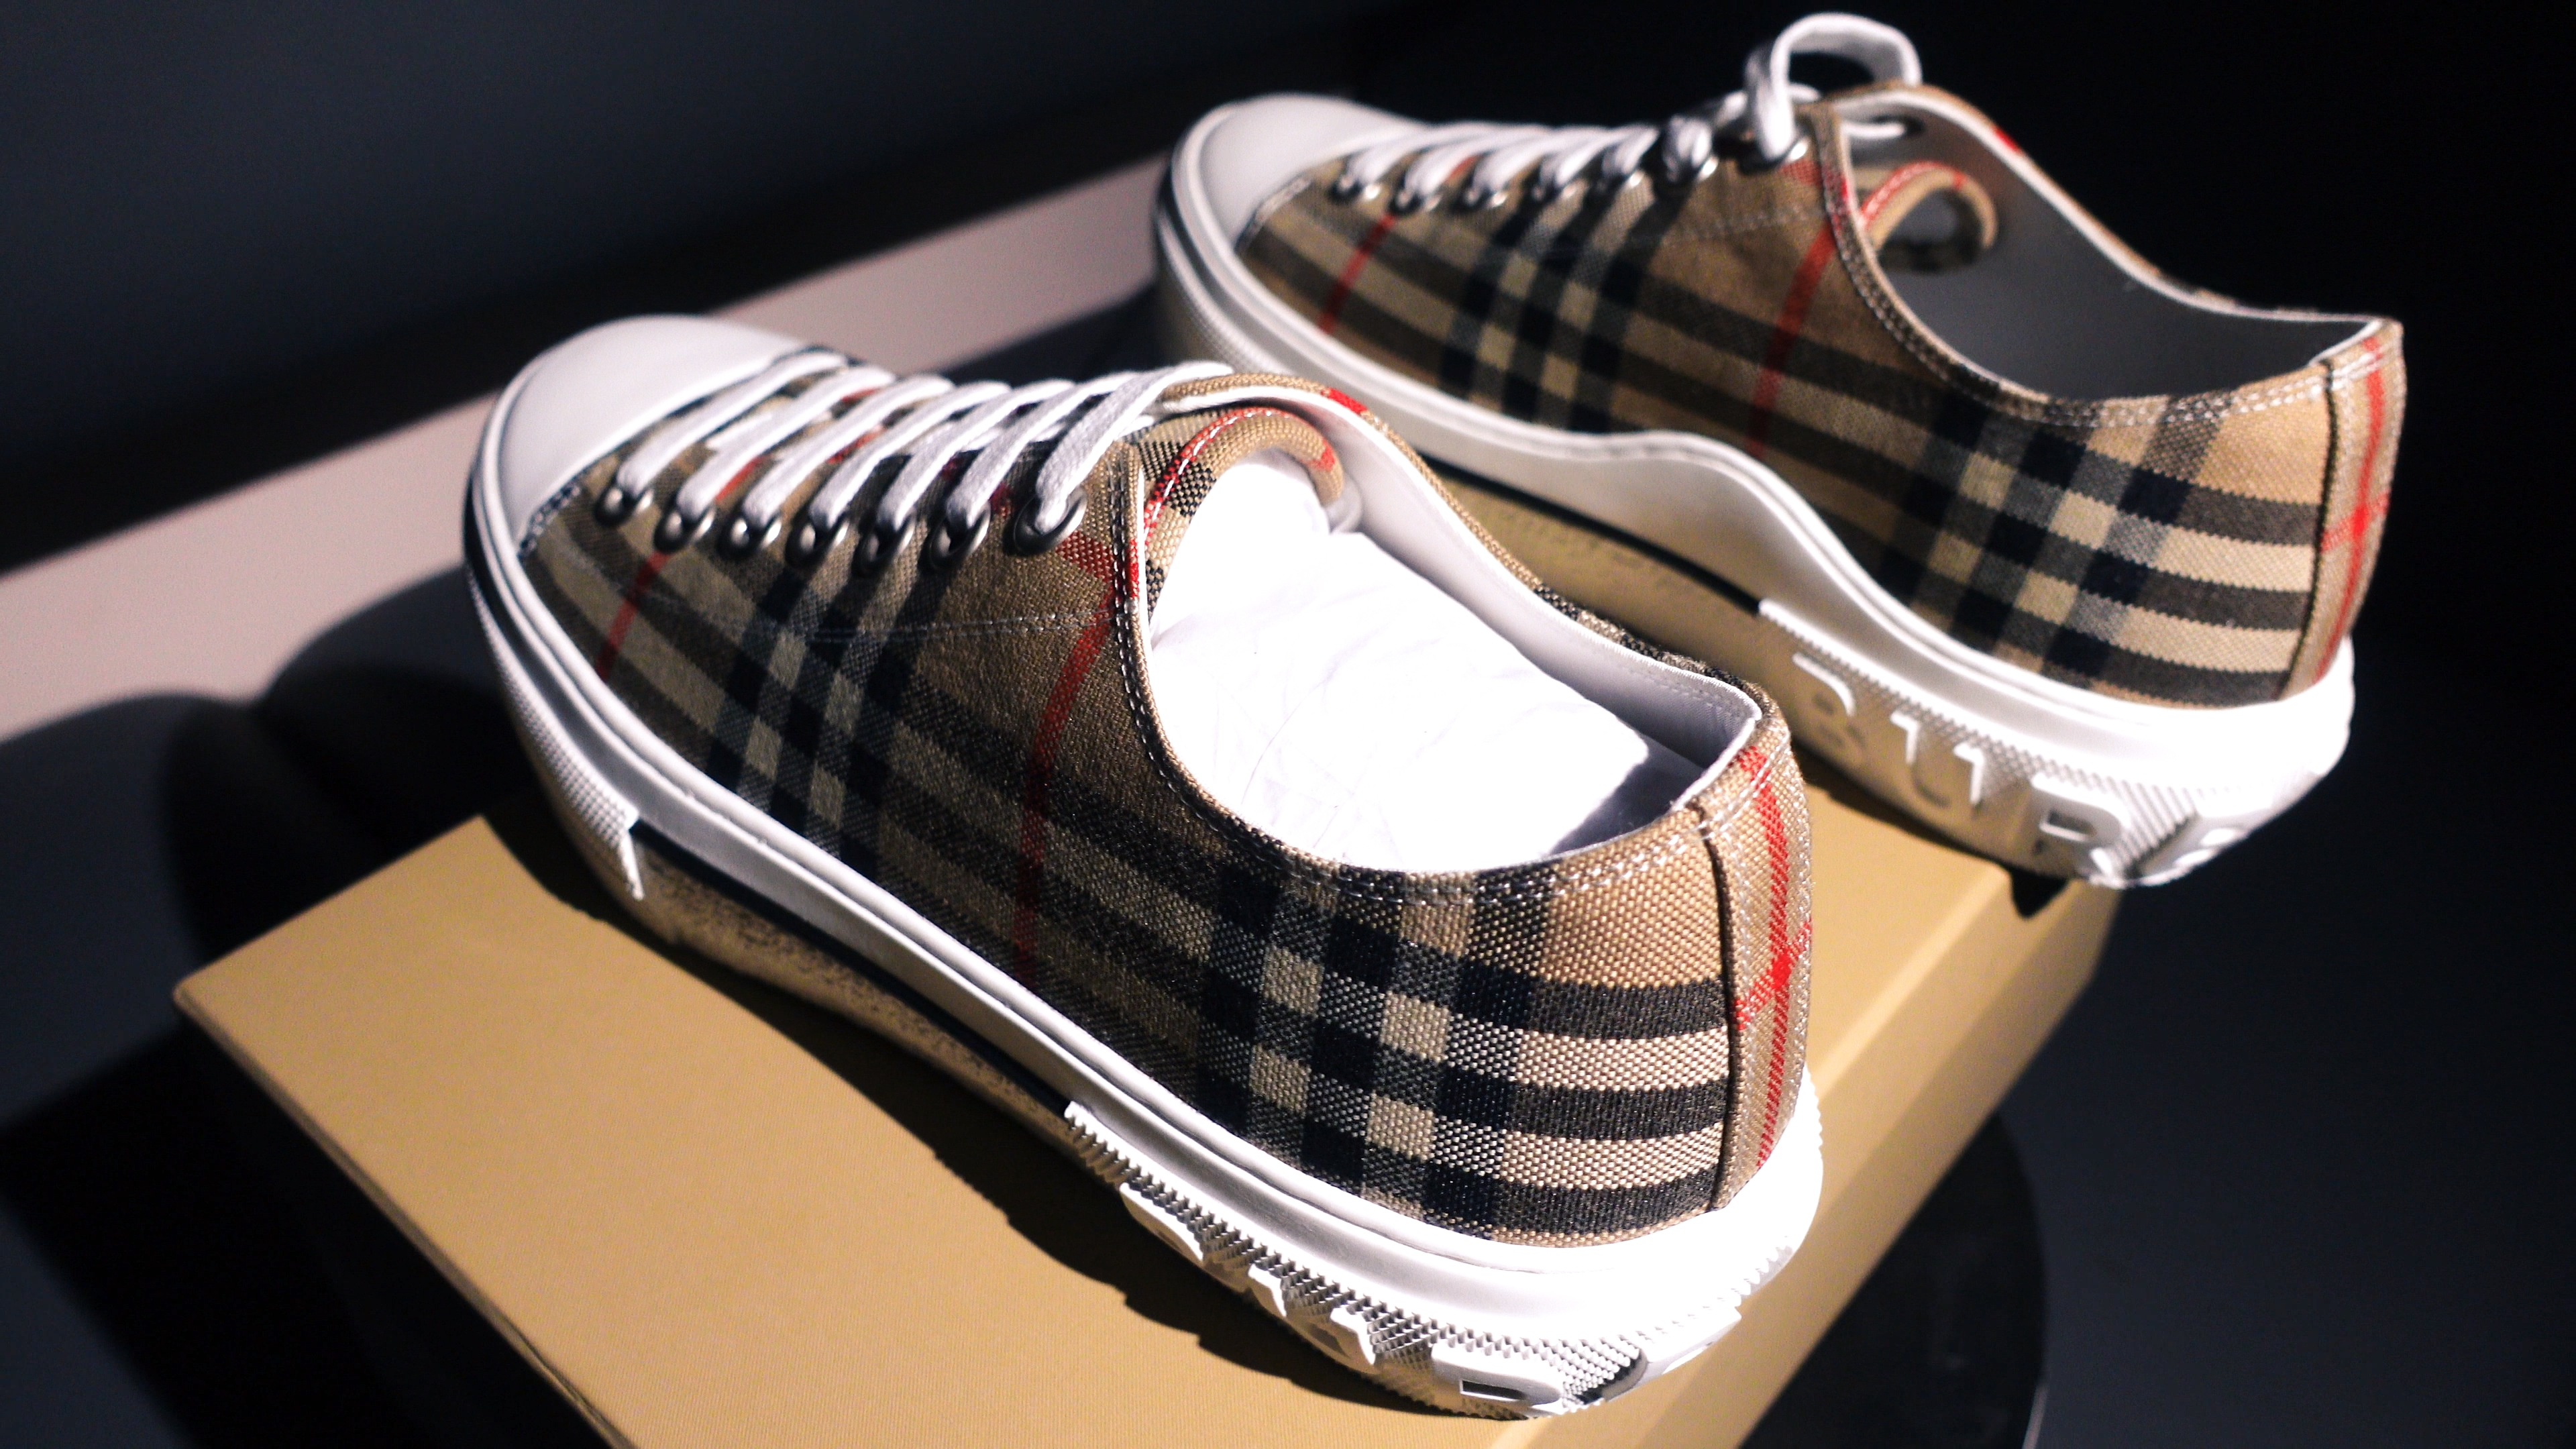 Burberry lowsneakers.